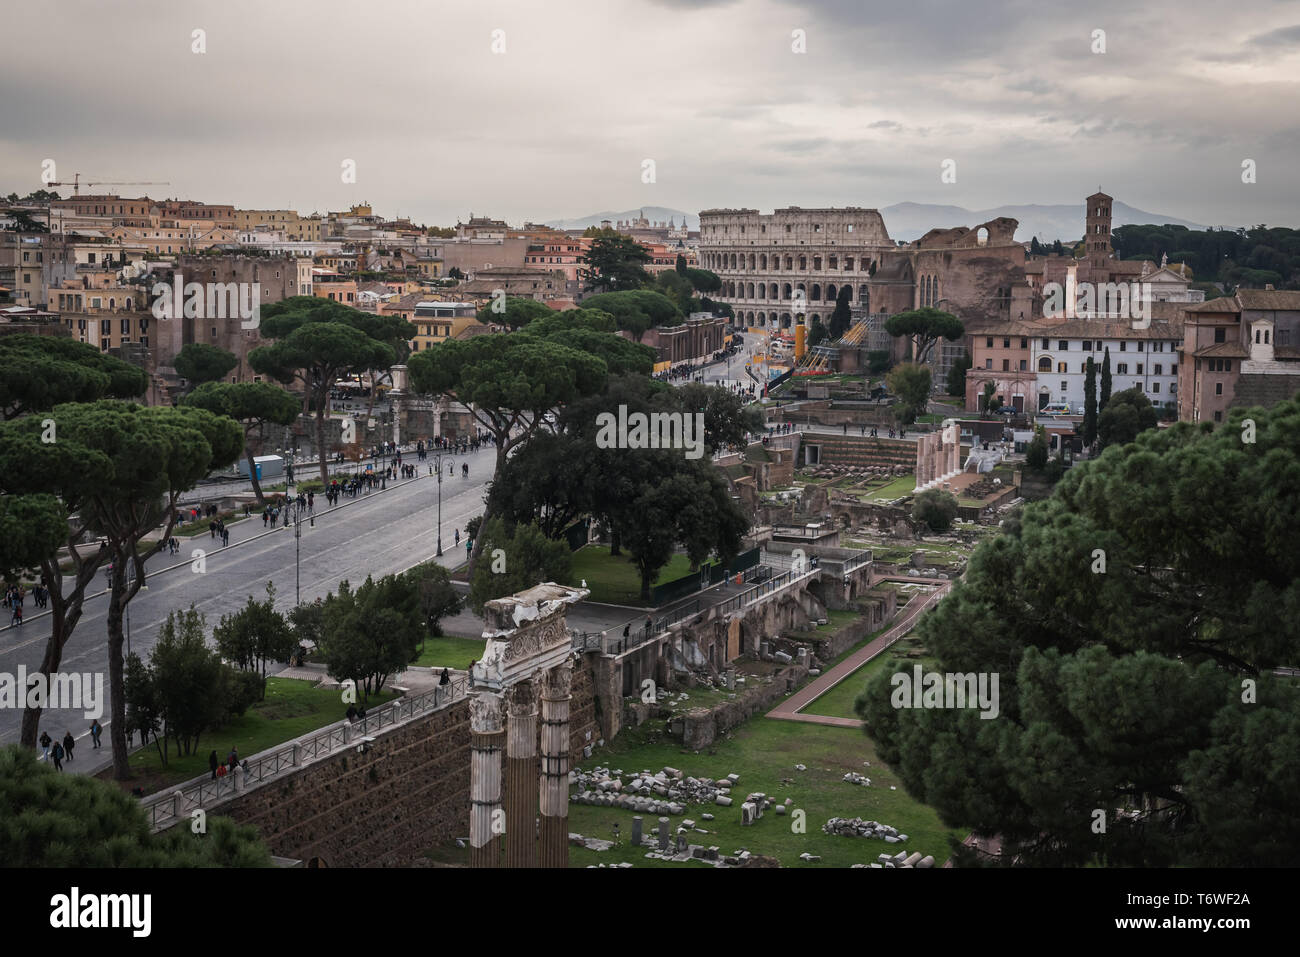 The ruins and the Colosseum of Rome from the monument Vittorio Emanuele II in Italy Stock Photo